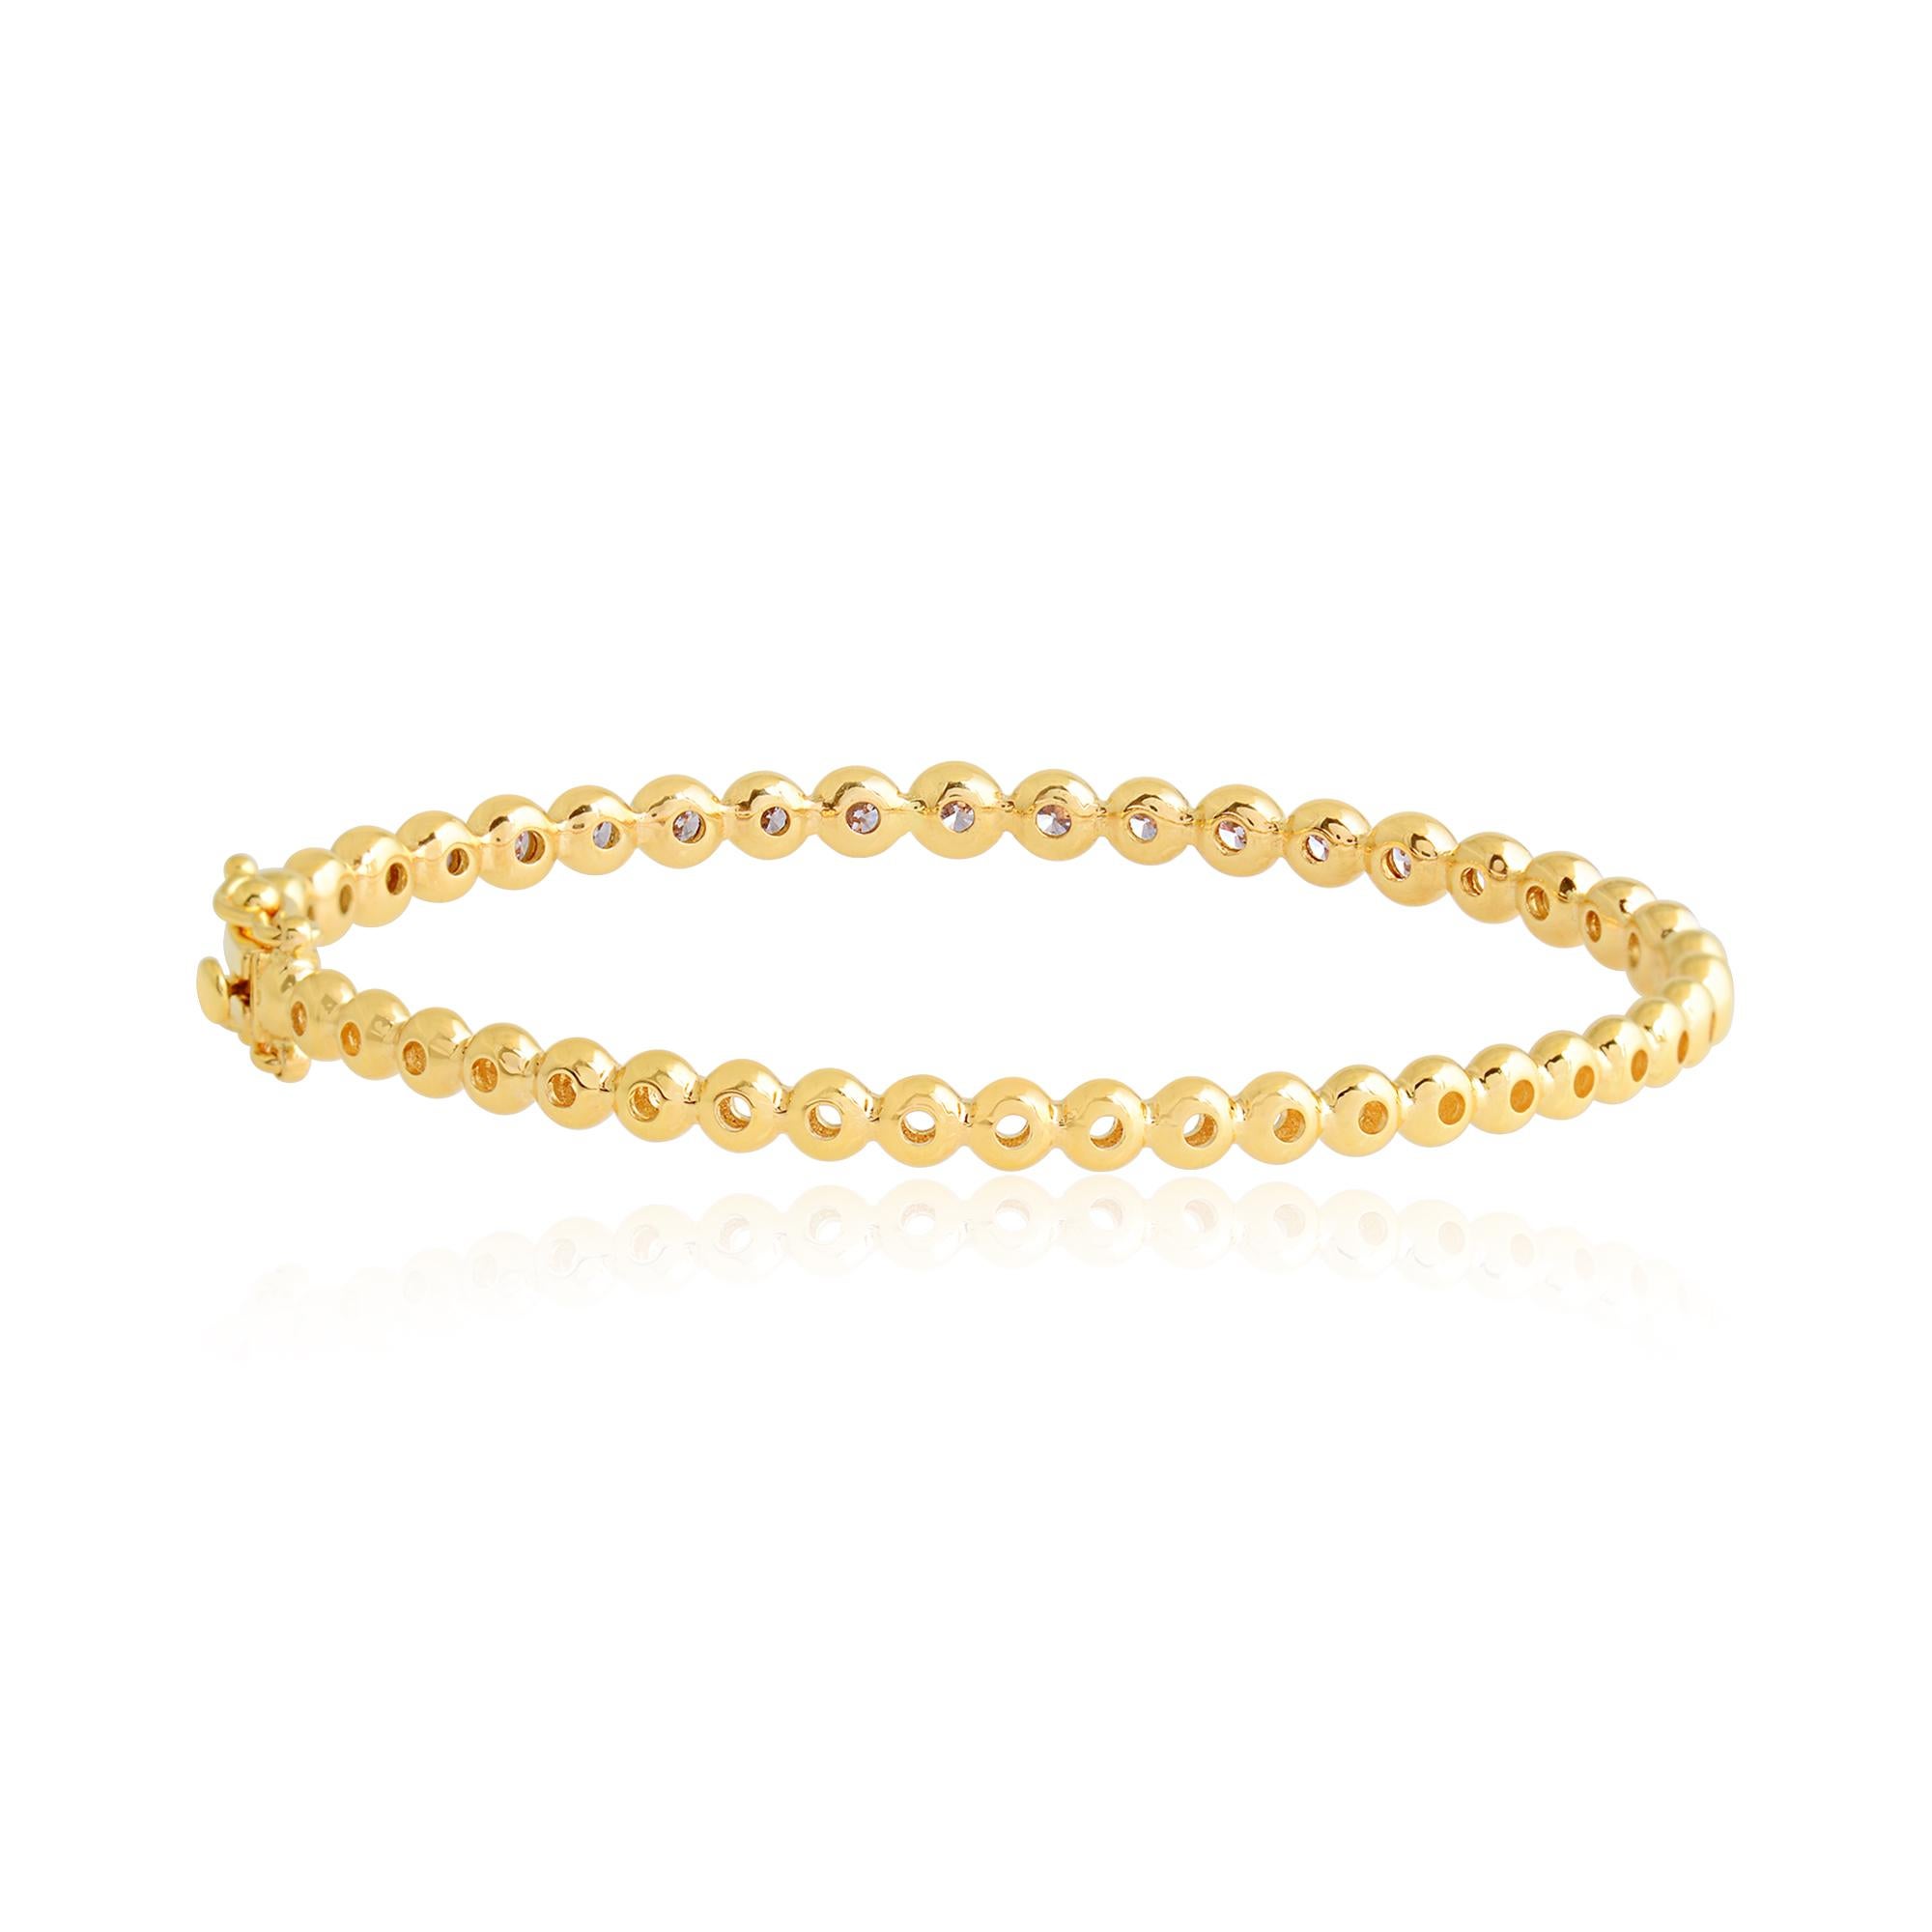 Round Cut 2.70 Carat Single Line Natural Diamond Bracelet Solid 18k Yellow Gold Jewelry For Sale